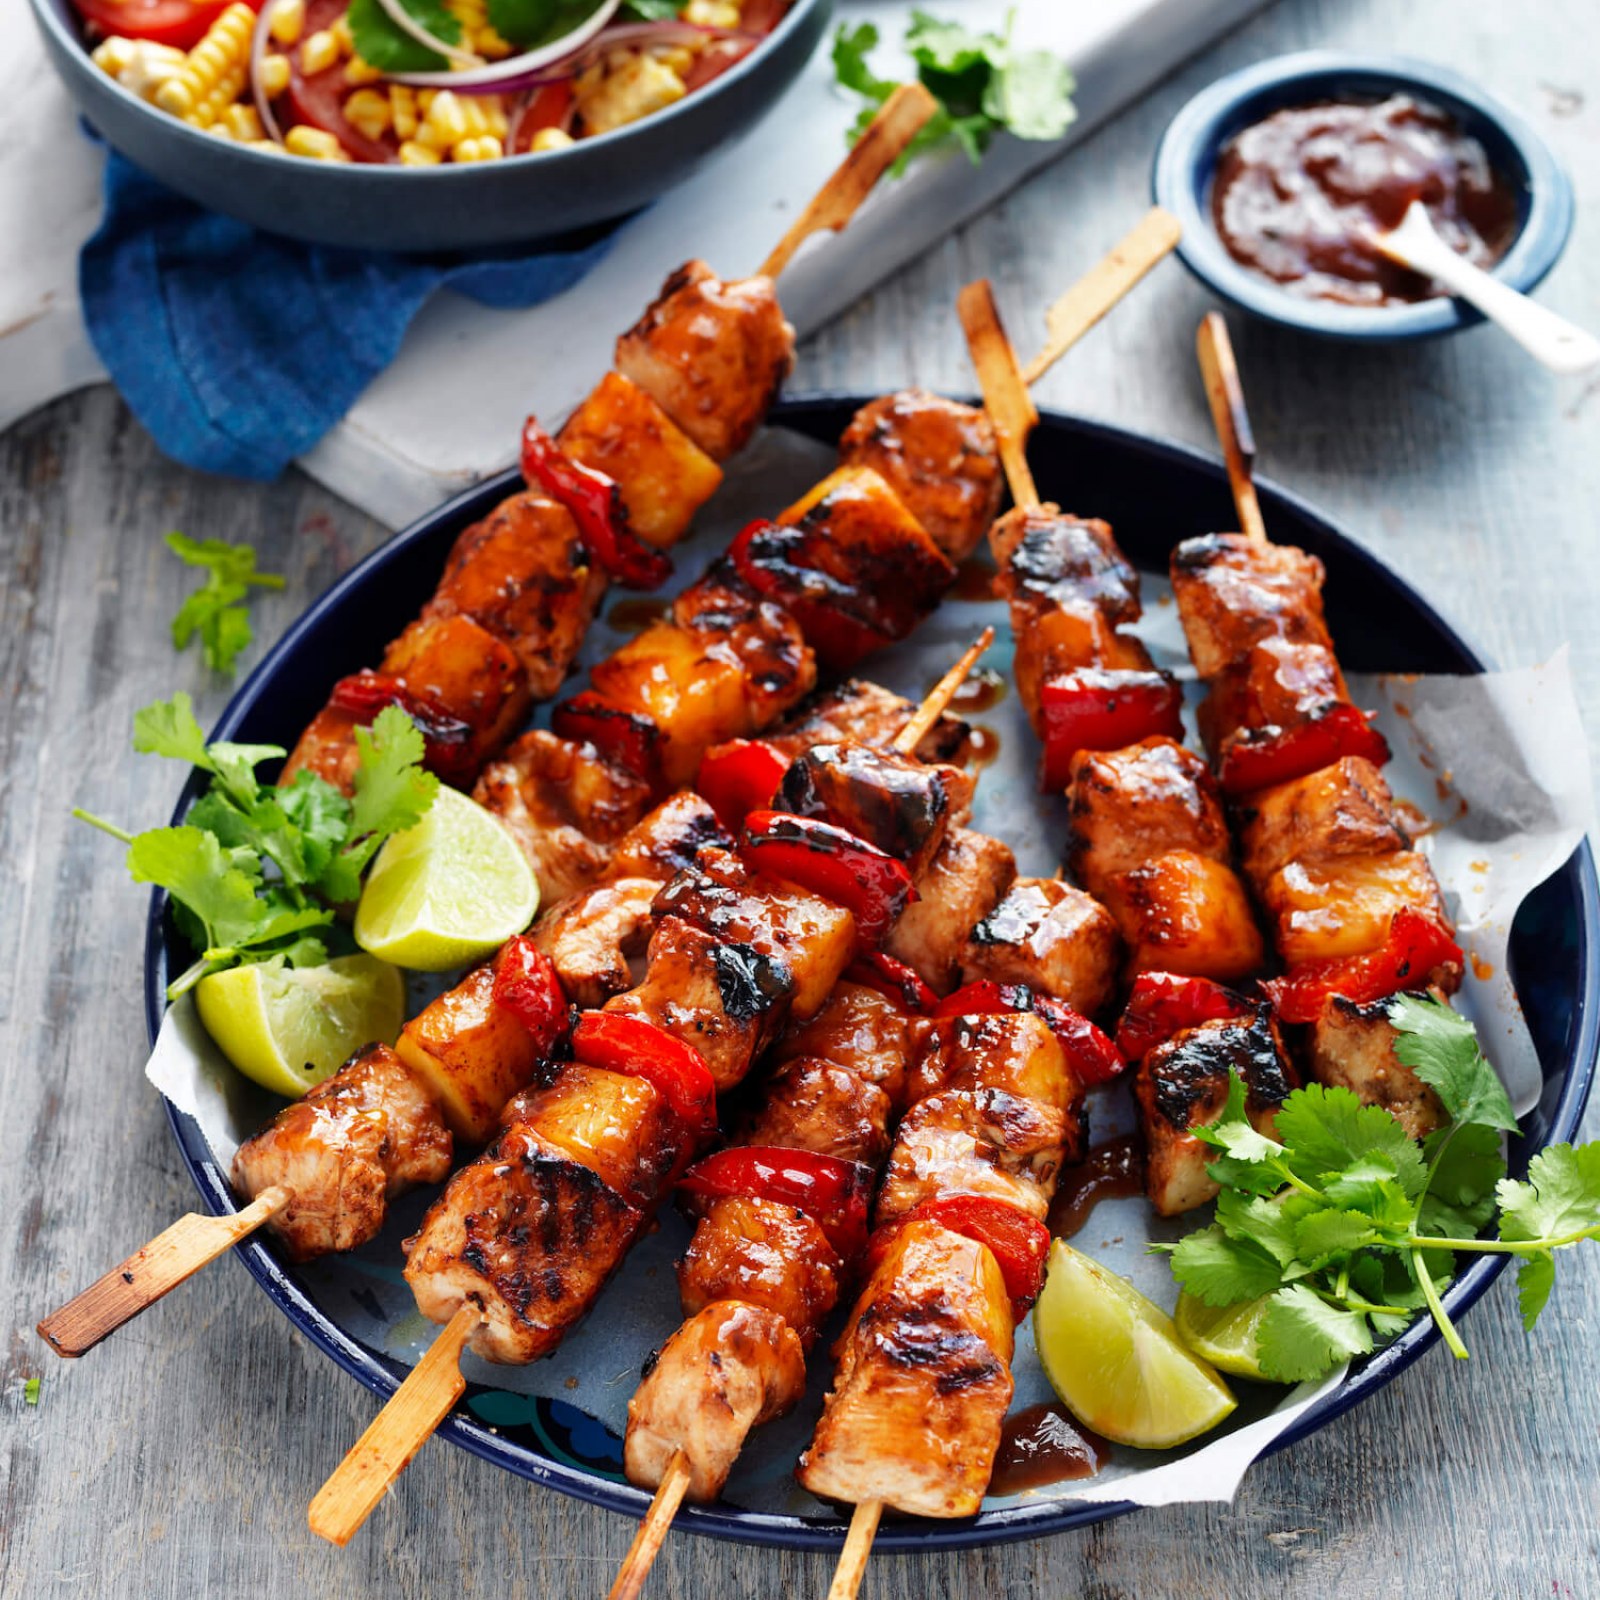 How to make BBQ skewers, Cook Free Recipes from Australia's Best Brands